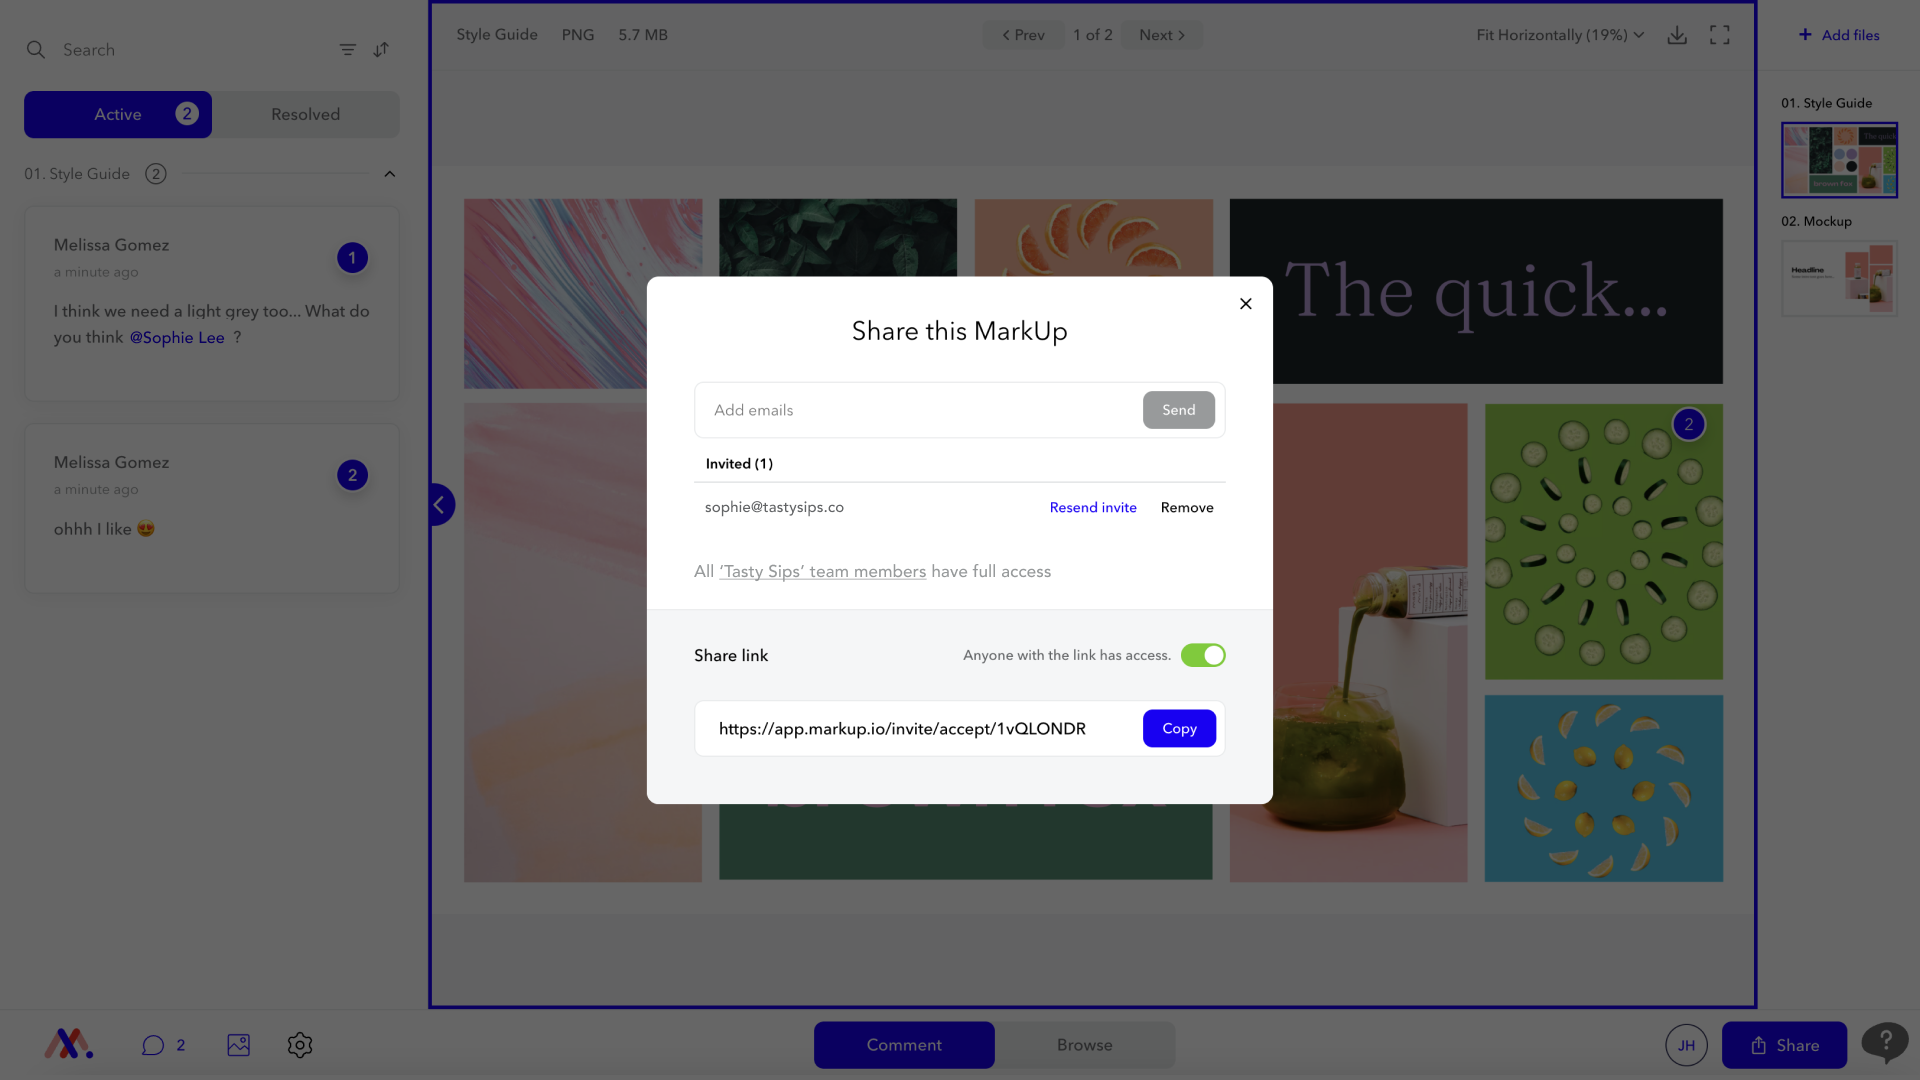 MarkUp.io invite modal. Invite teammates and guest reviewers using their emails, or just share the link to the MarkUp for easy access, no registration required.